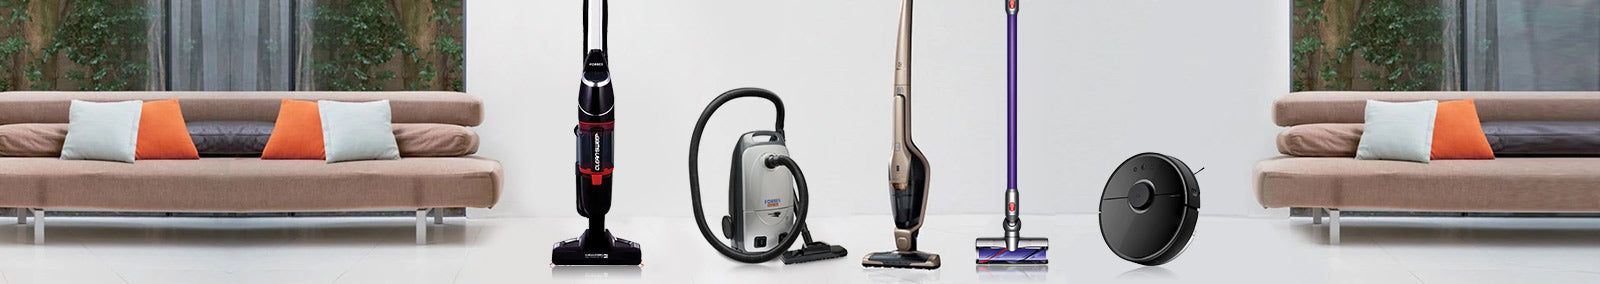 Top Pick Vacuums Cleaners for Your Cleaning Needs